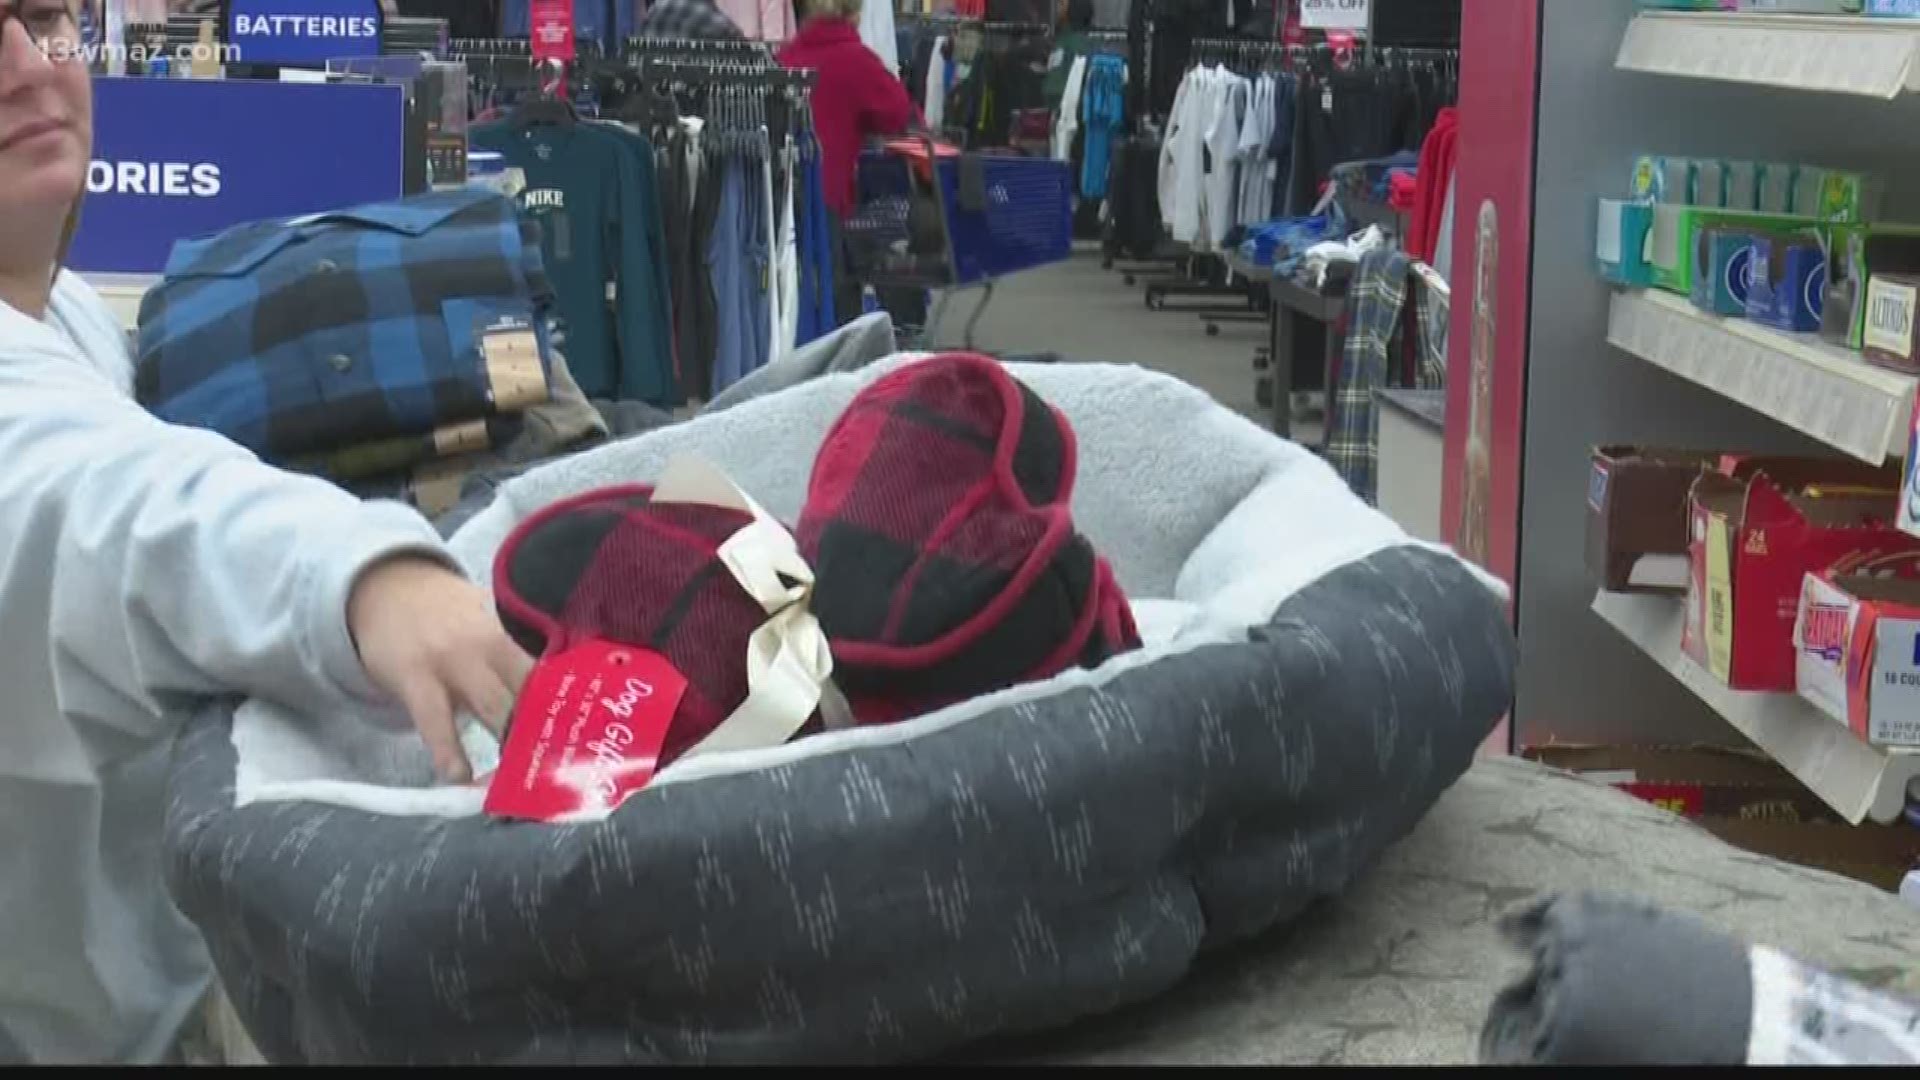 Shoppers braved the cold weather before doors opened at 6 a.m. Friday morning.